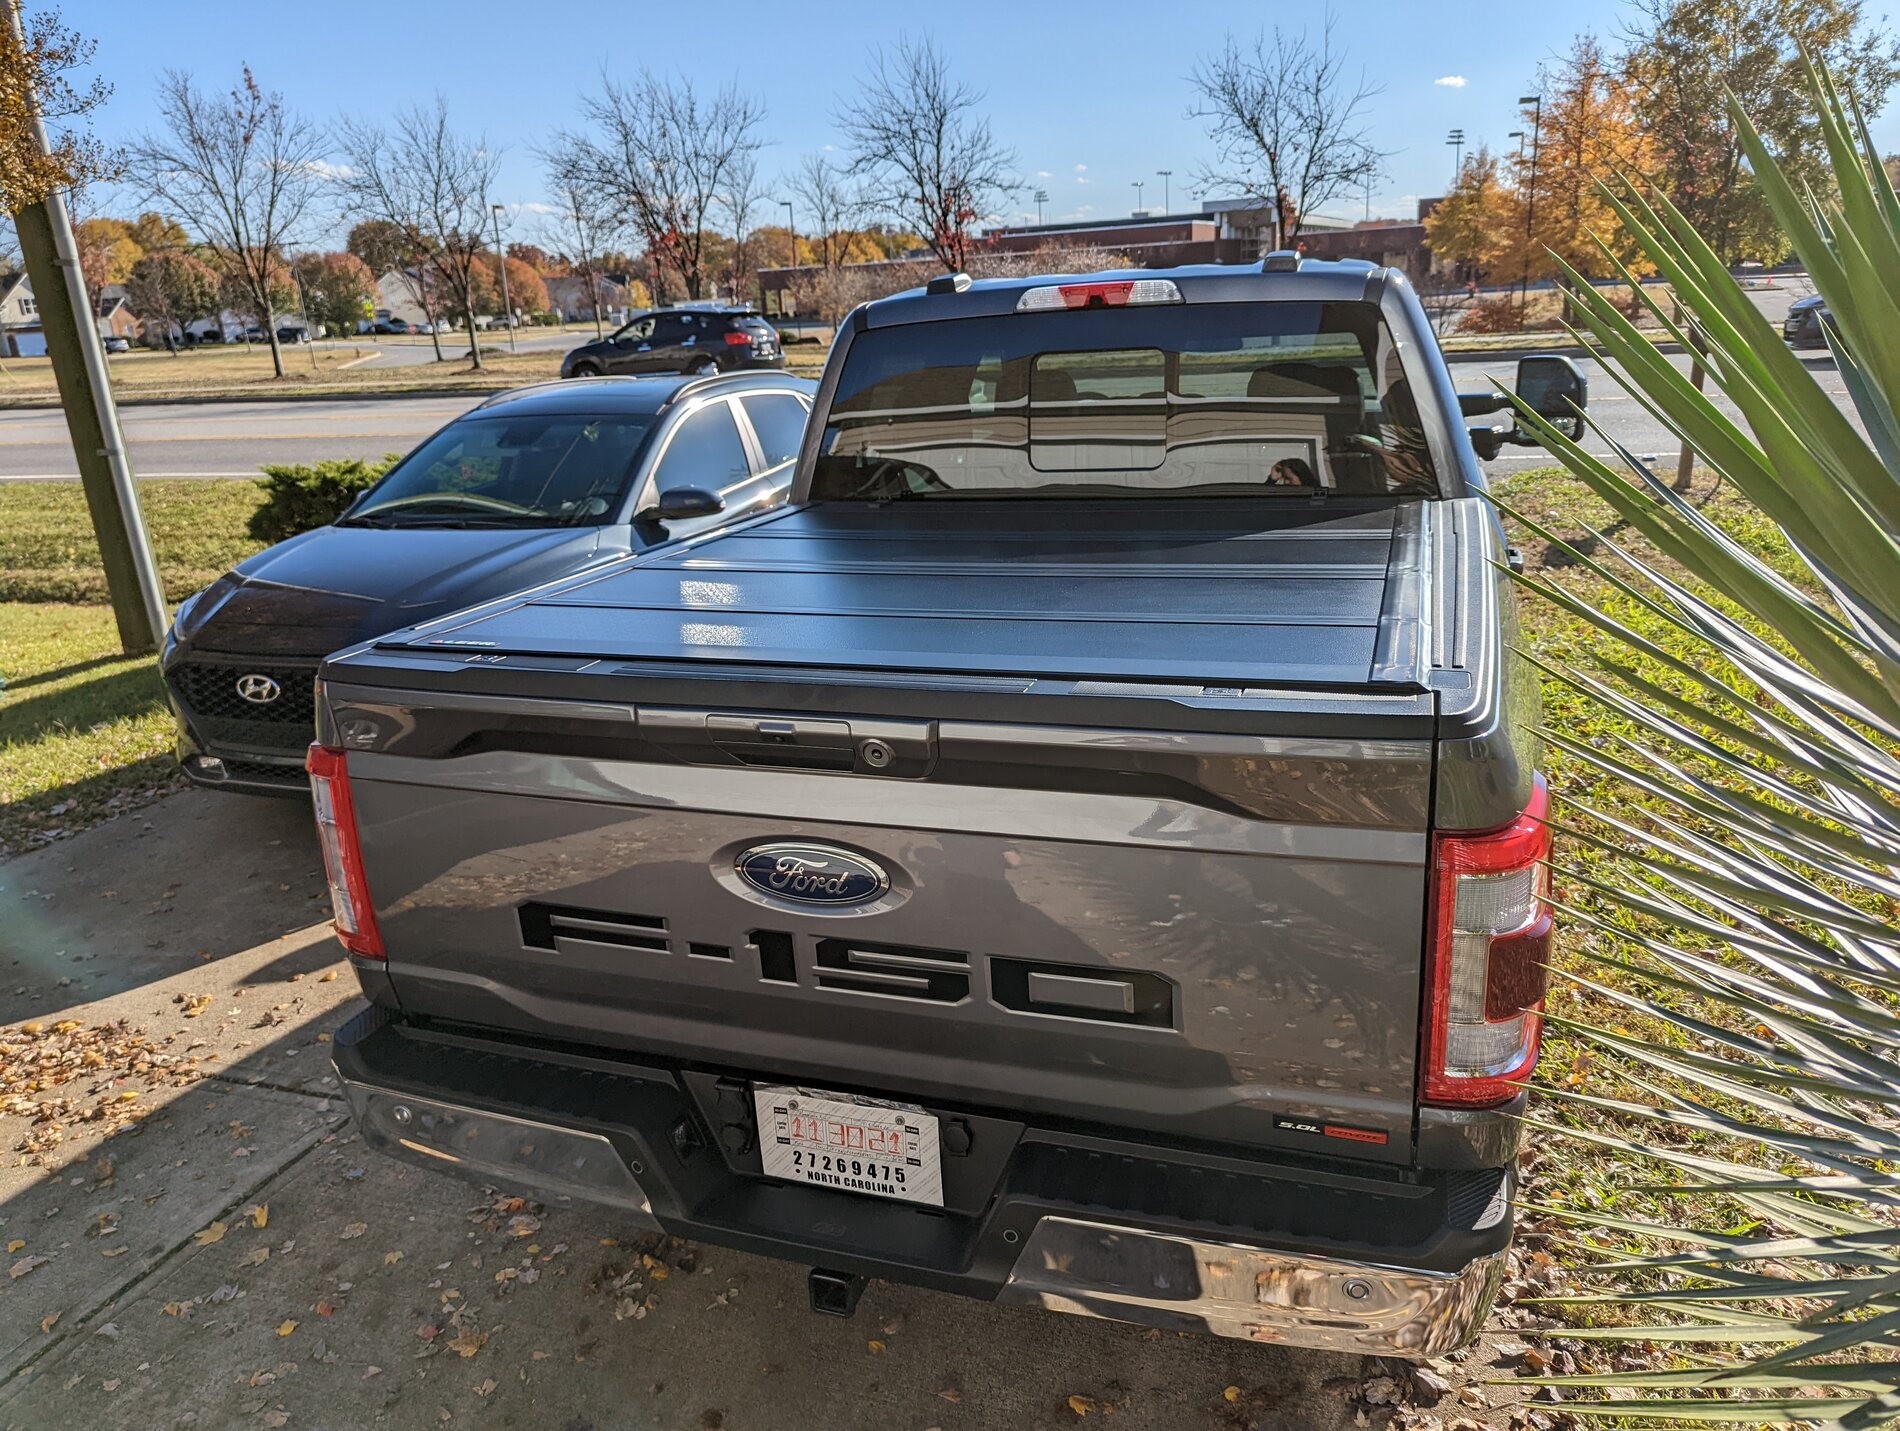 Ford F-150 Lightning Leer HF650M Tonneau Cover Review with Photos! - Install & First Impressions PXL_20211113_193429319 (1)